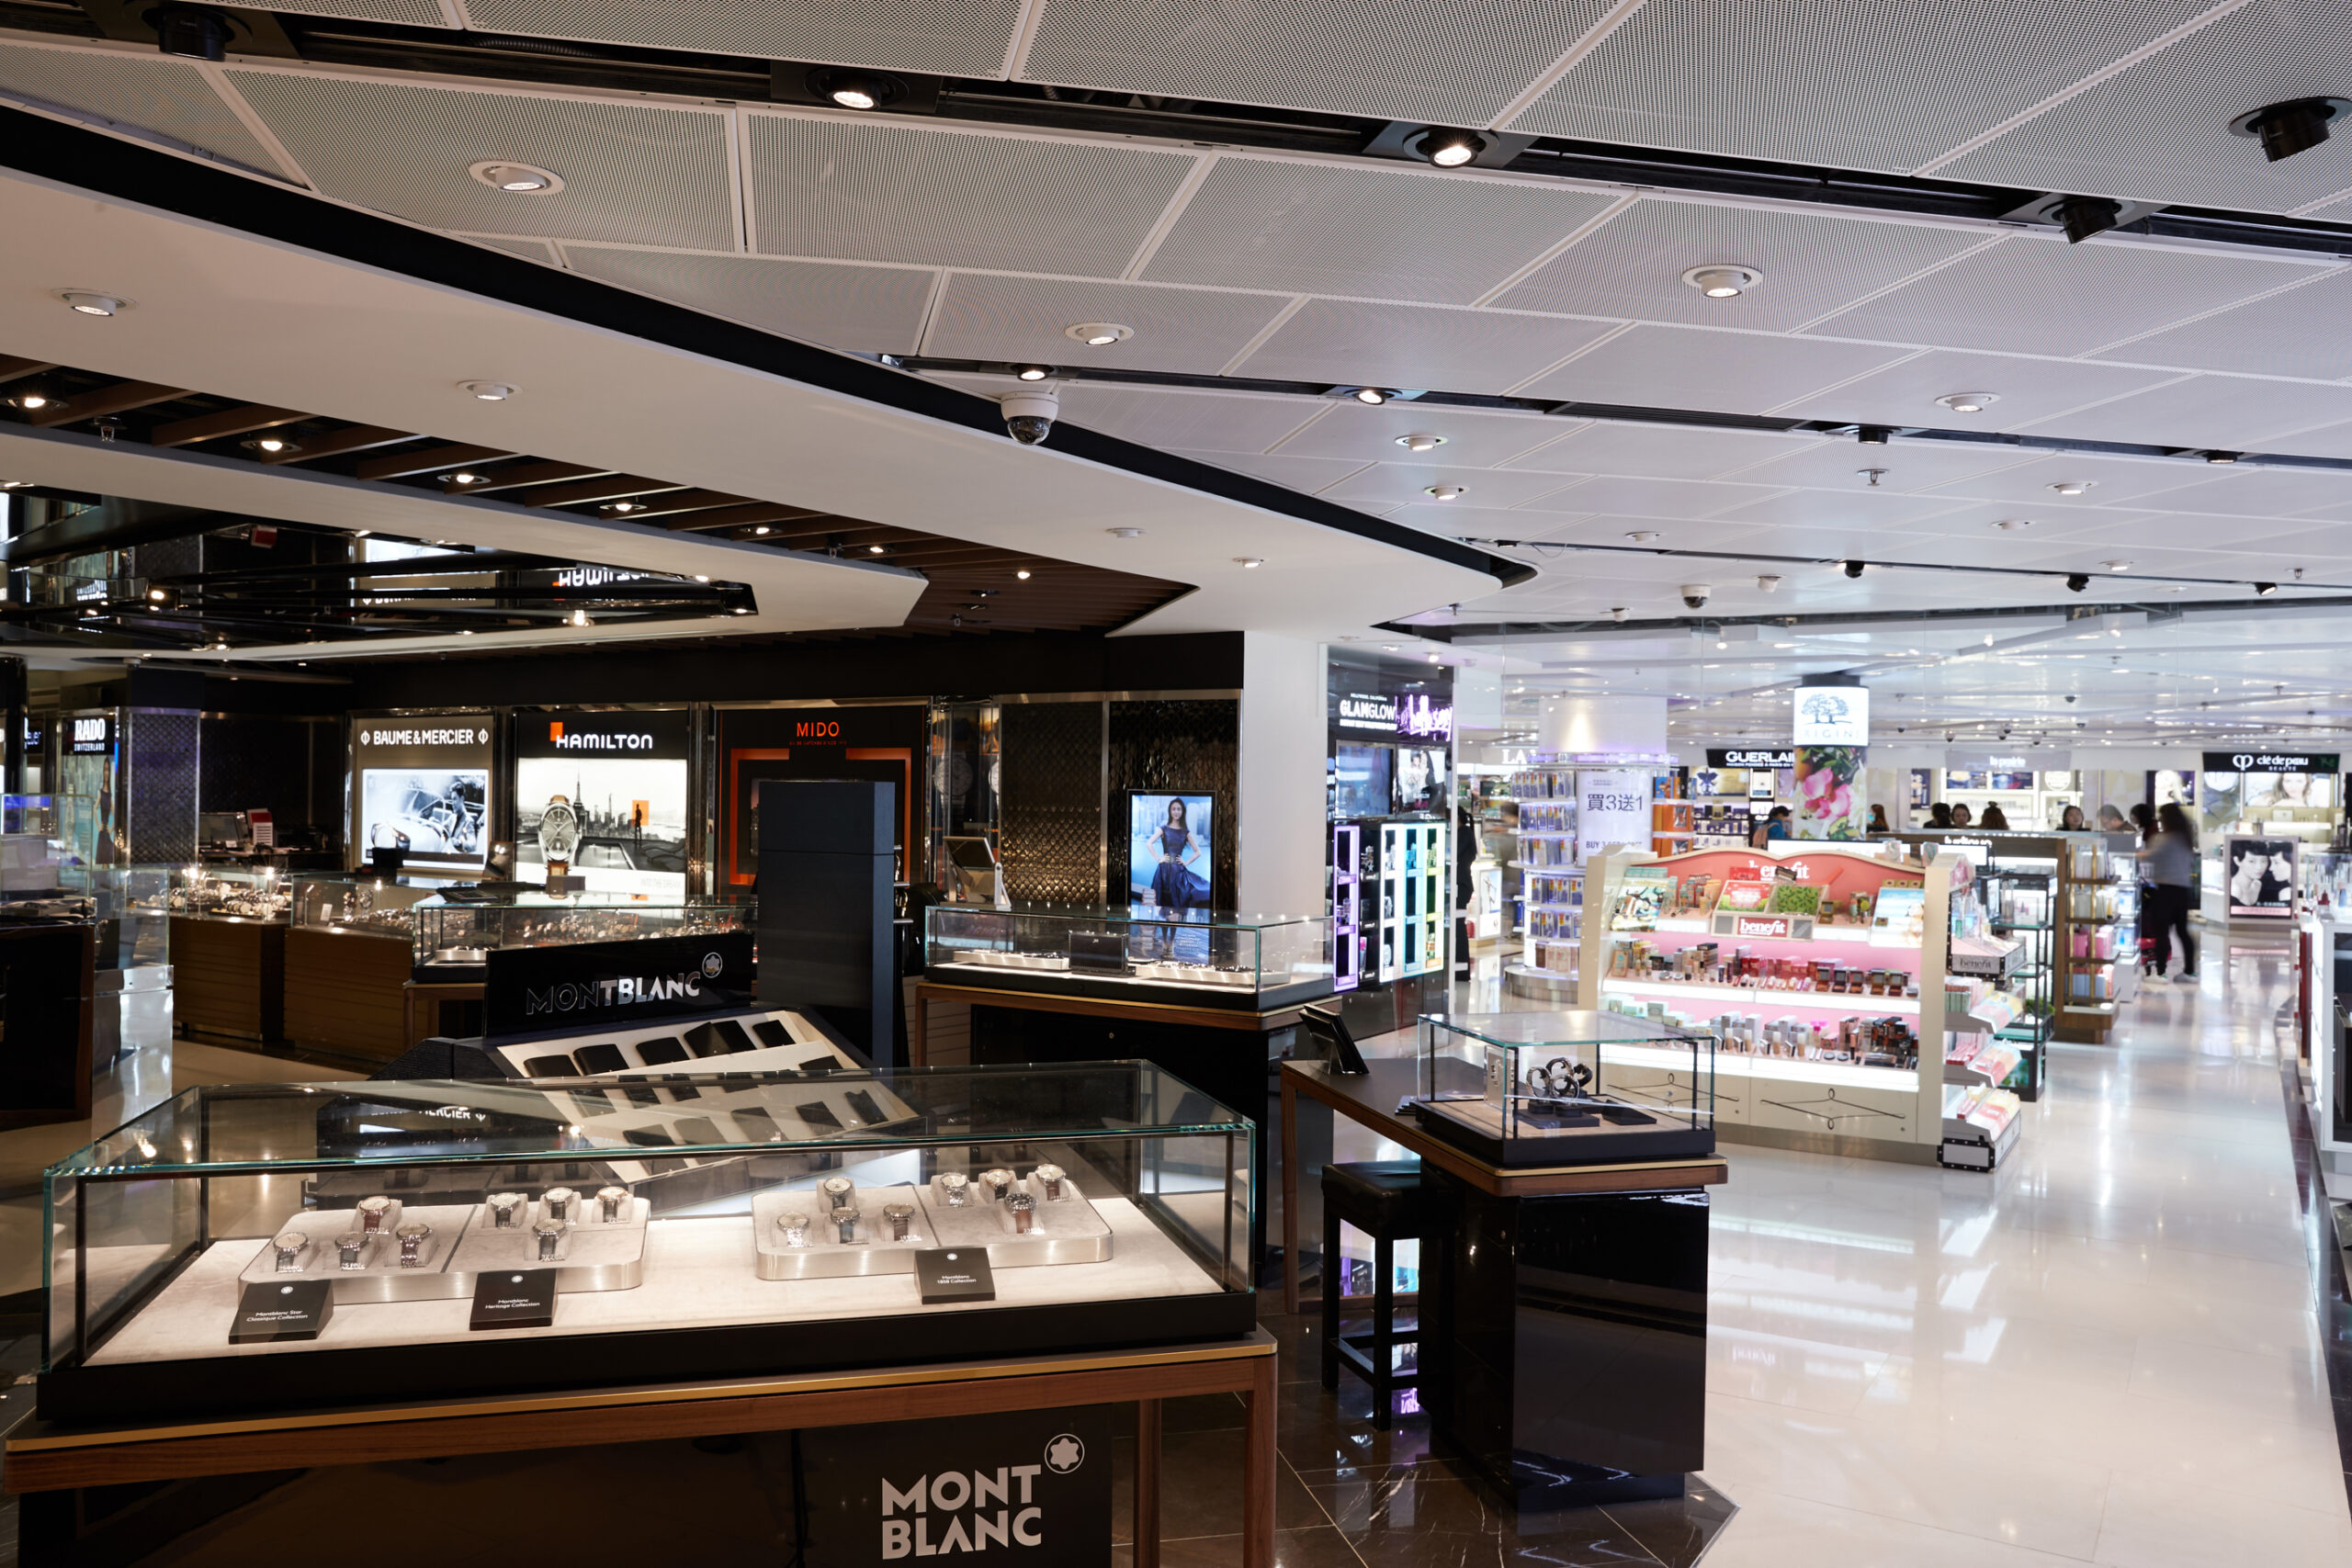 travelers-can-now-discover-an-expanded-assortment-of-brands-and-exclusive-products-at-dfs-boutiques-in-the-departures-east-hall-north-and-departures-east-hall-south